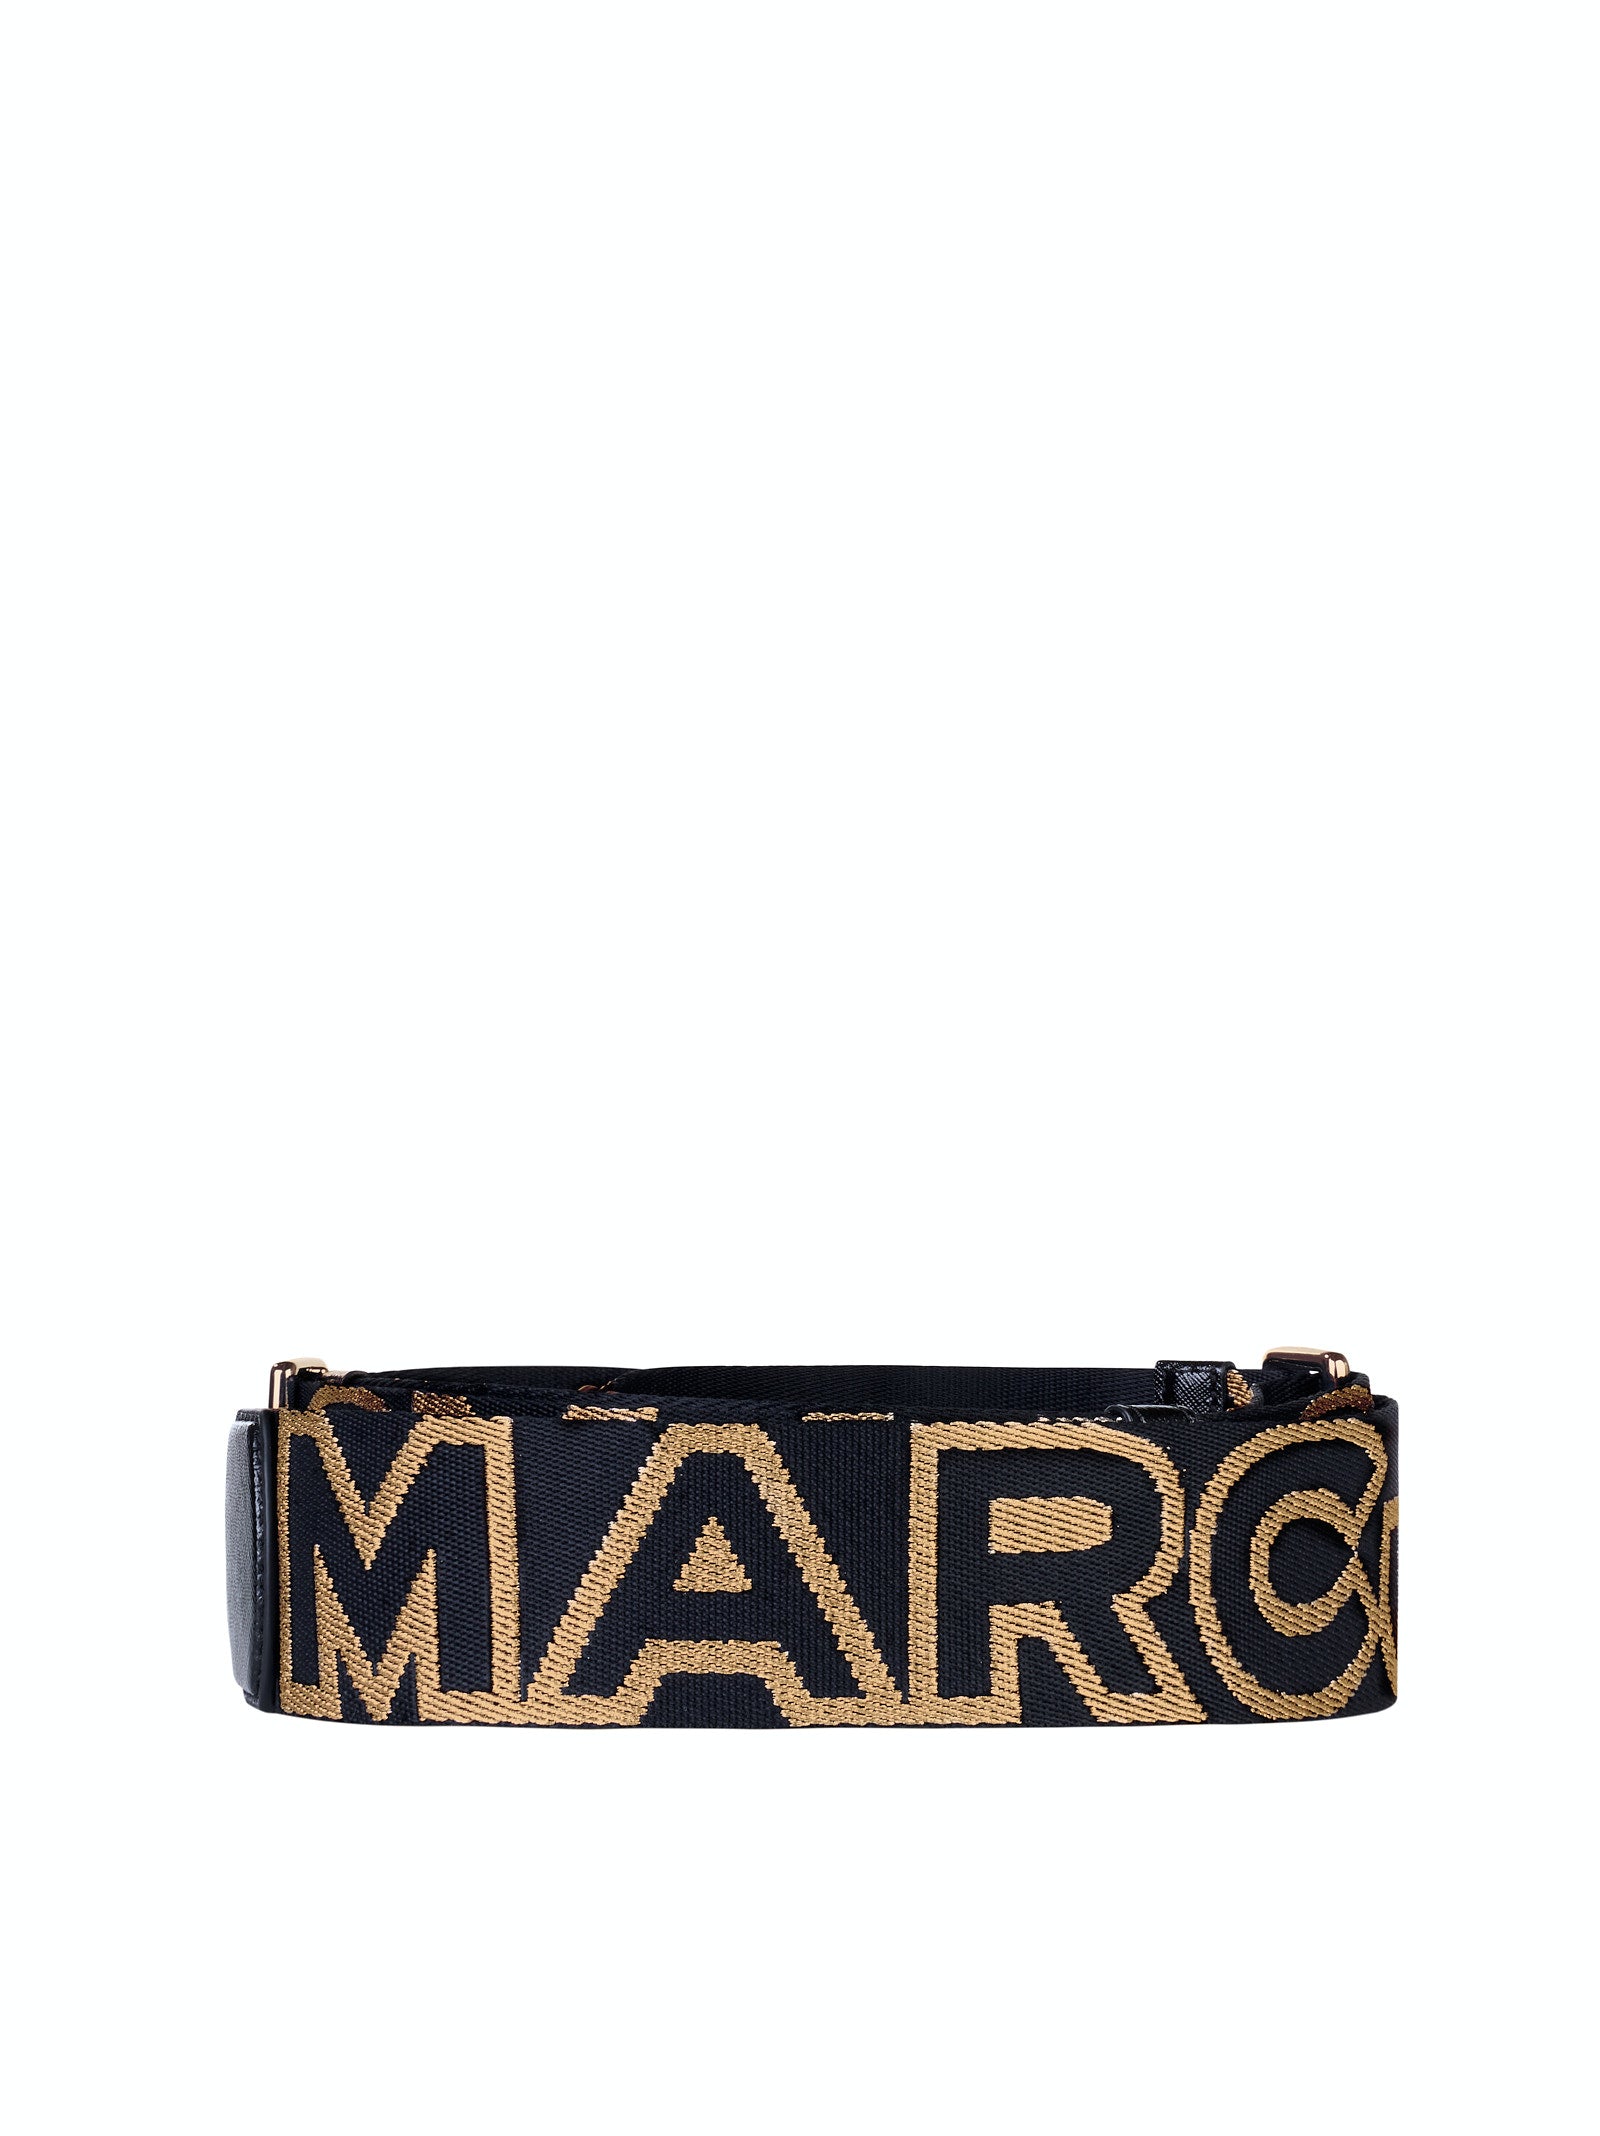 Tracolla MARC JACOBS Strap
Black/gold